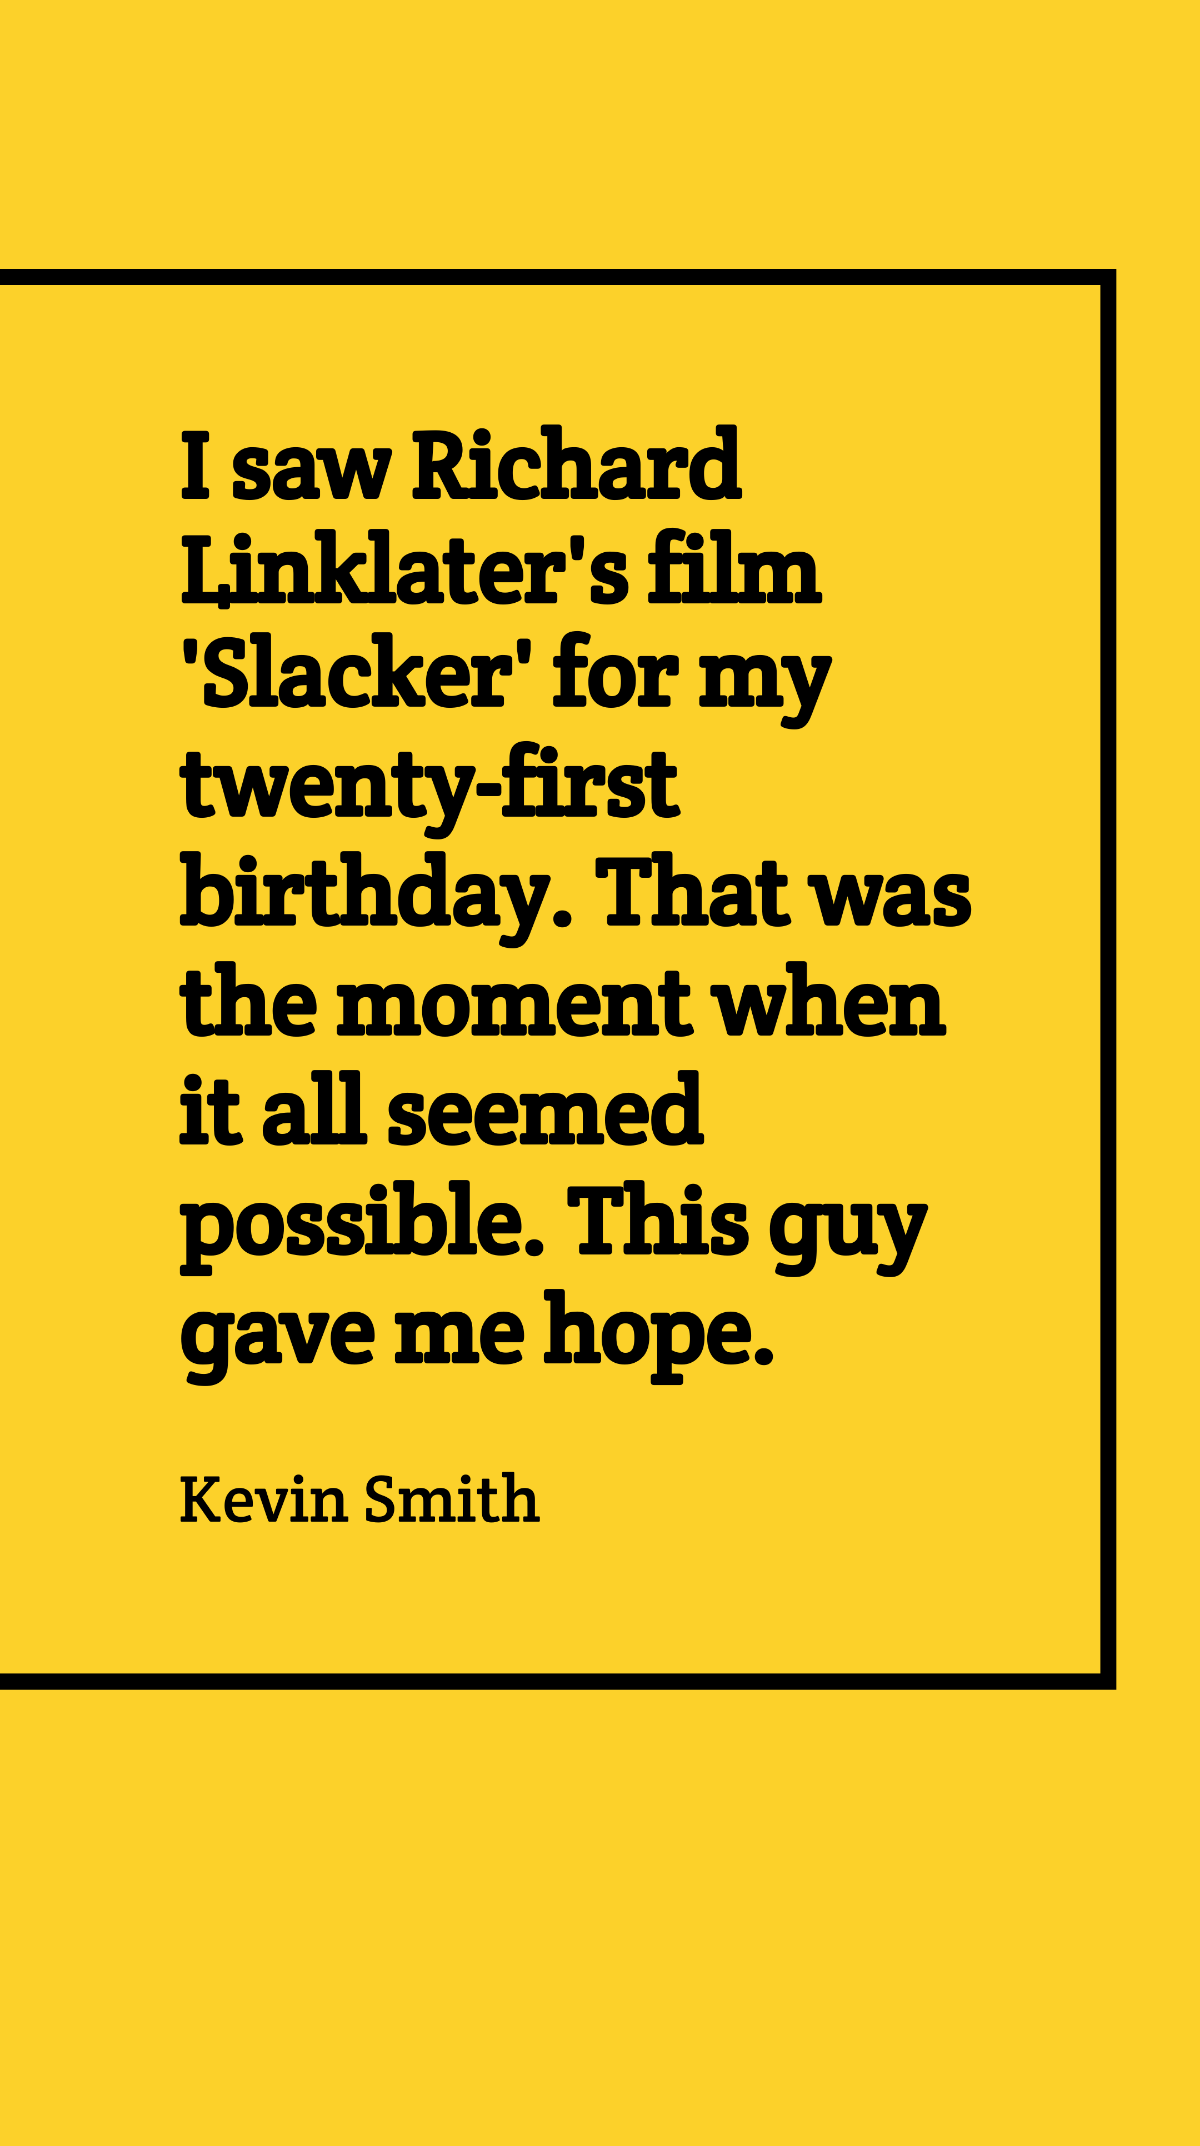 Kevin Smith - I saw Richard Linklater's film 'Slacker' for my twenty-first birthday. That was the moment when it all seemed possible. This guy gave me hope.